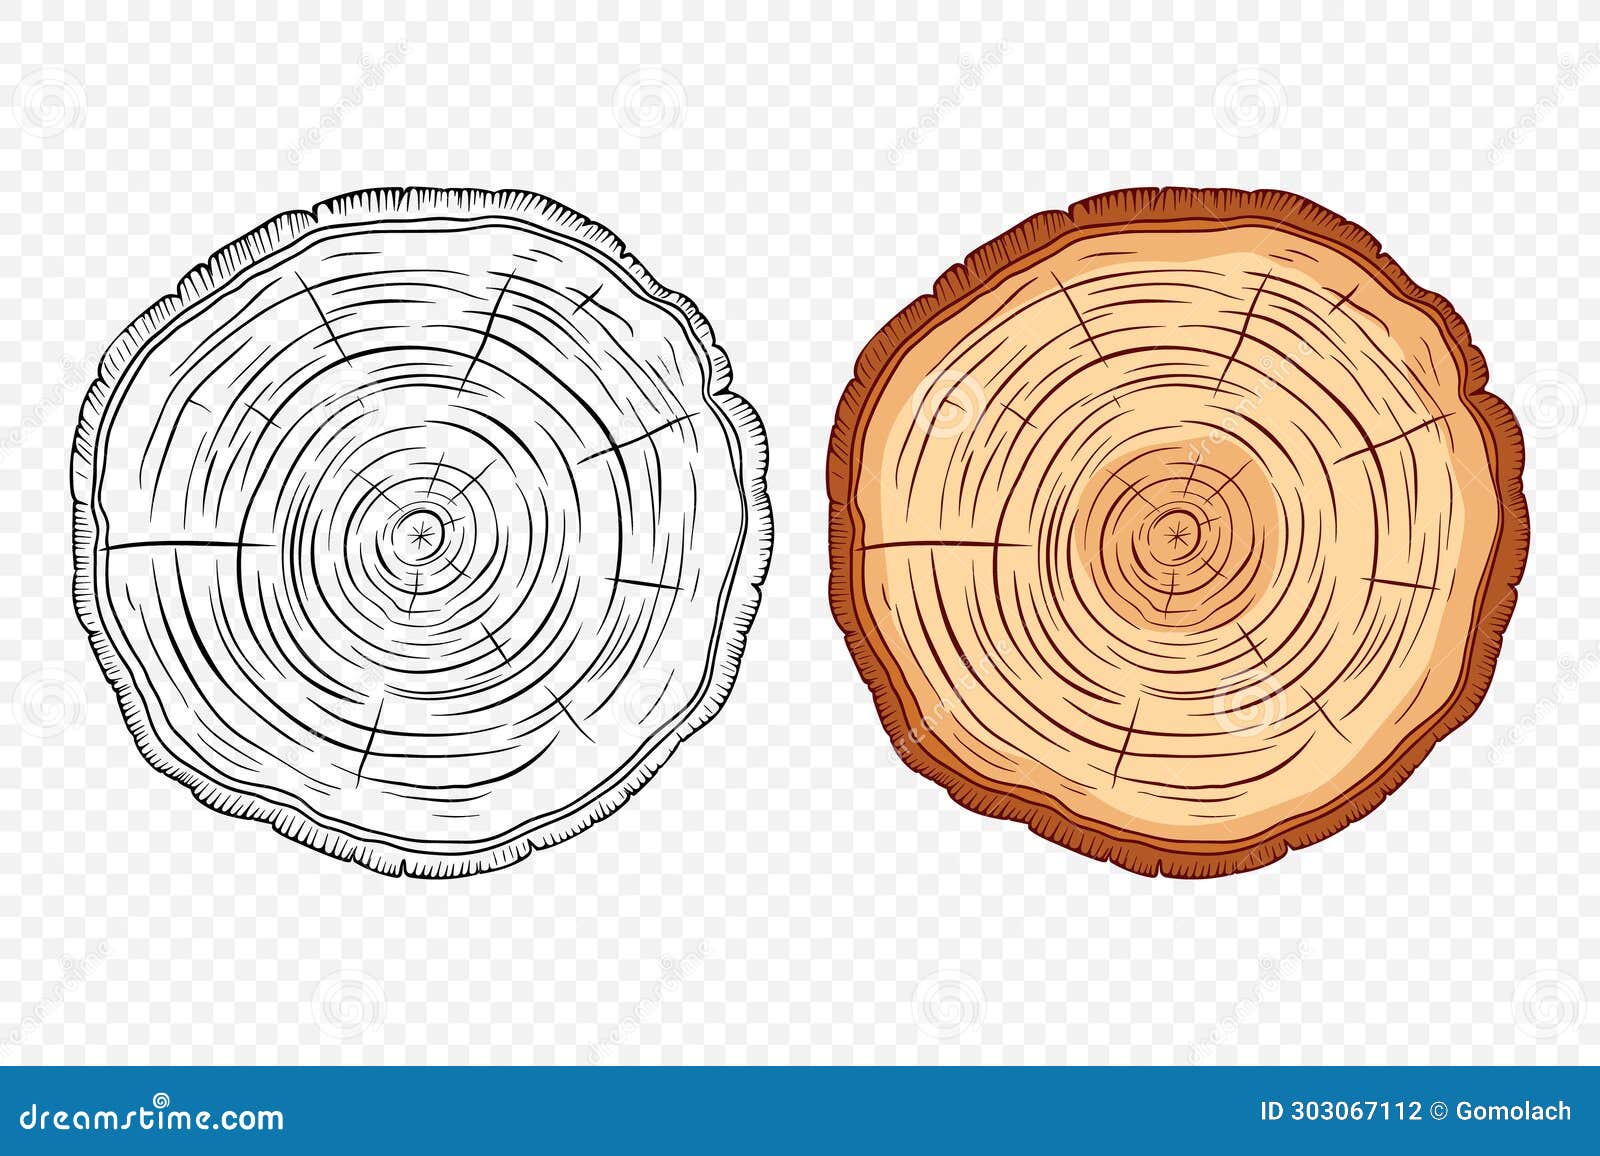 Forests | Free Full-Text | How Cultural Heritage Studies Based on  Dendrochronology Can Be Improved through Two-Way Communication